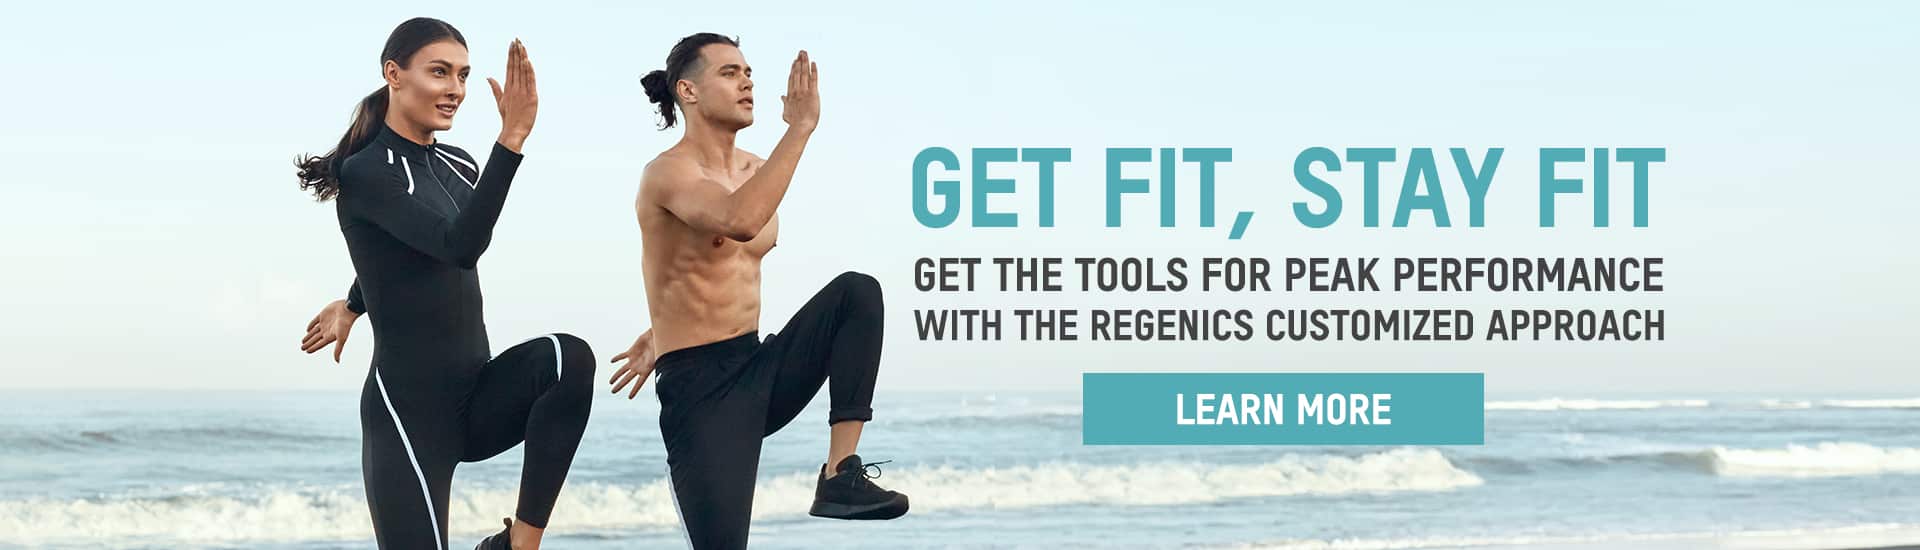 Two people exercise on a beach, dressed in athletic wear. Text reads: "Get Fit, Stay Fit with REGENICS. Get the tools for peak performance with the Regenics customized approach. Learn more.